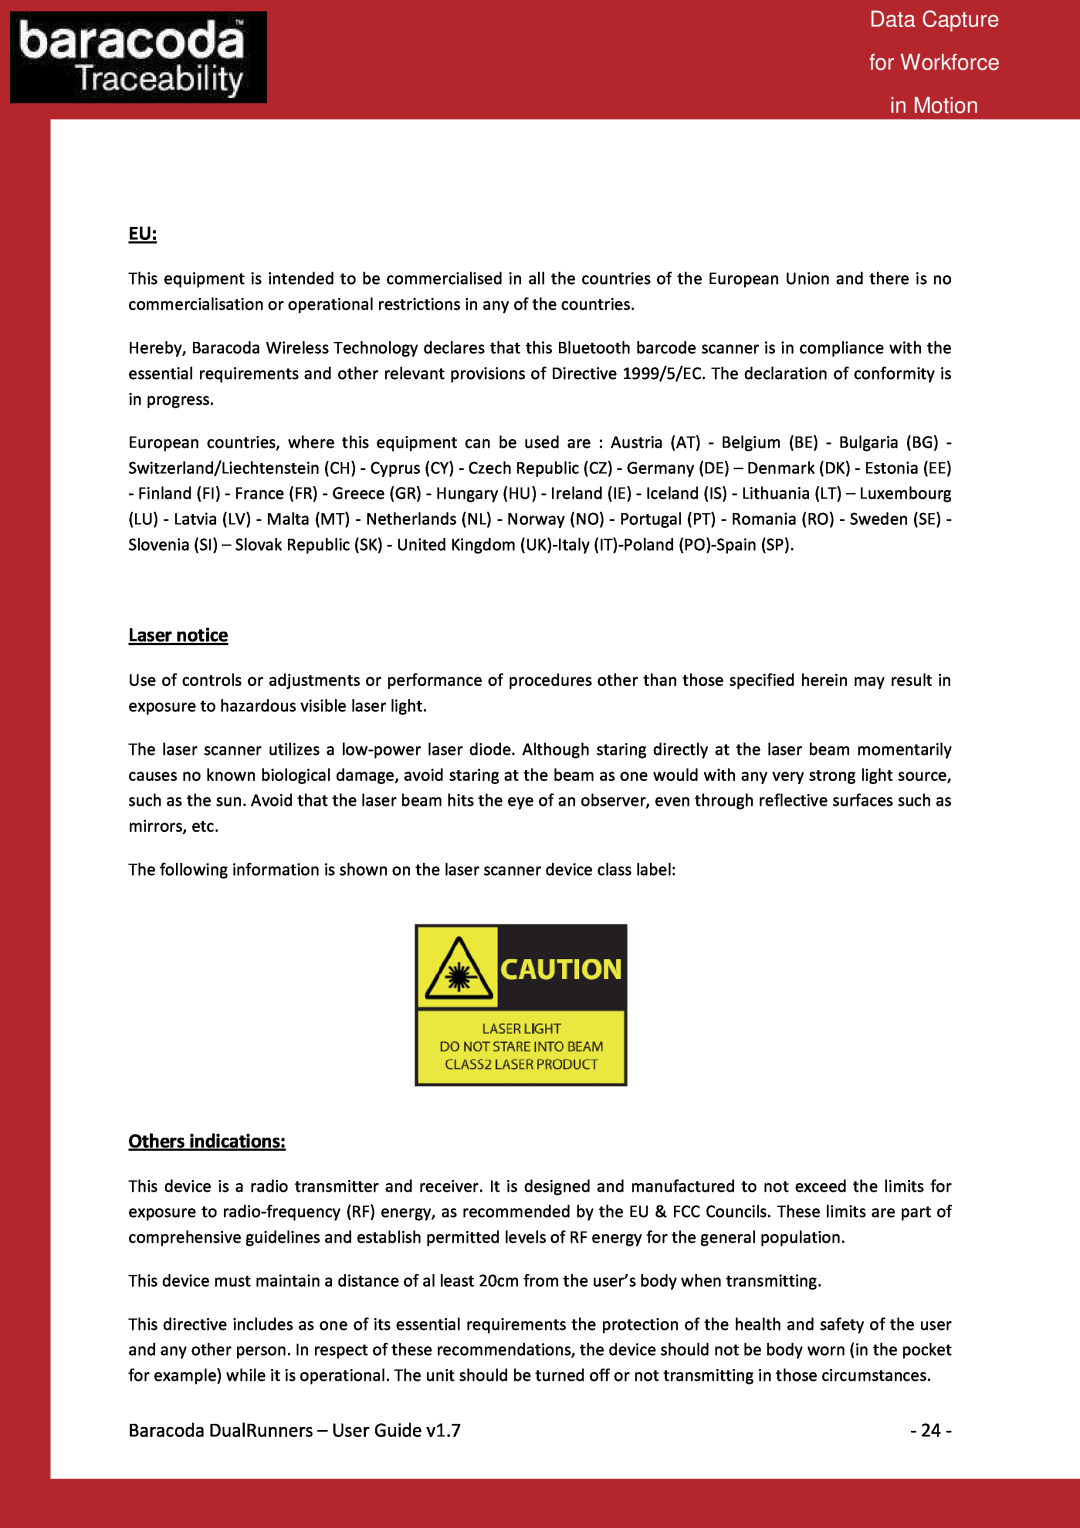 Baracoda Barcode Reader manual Laser notice, Others indications, Data Capture for Workforce in Motion 